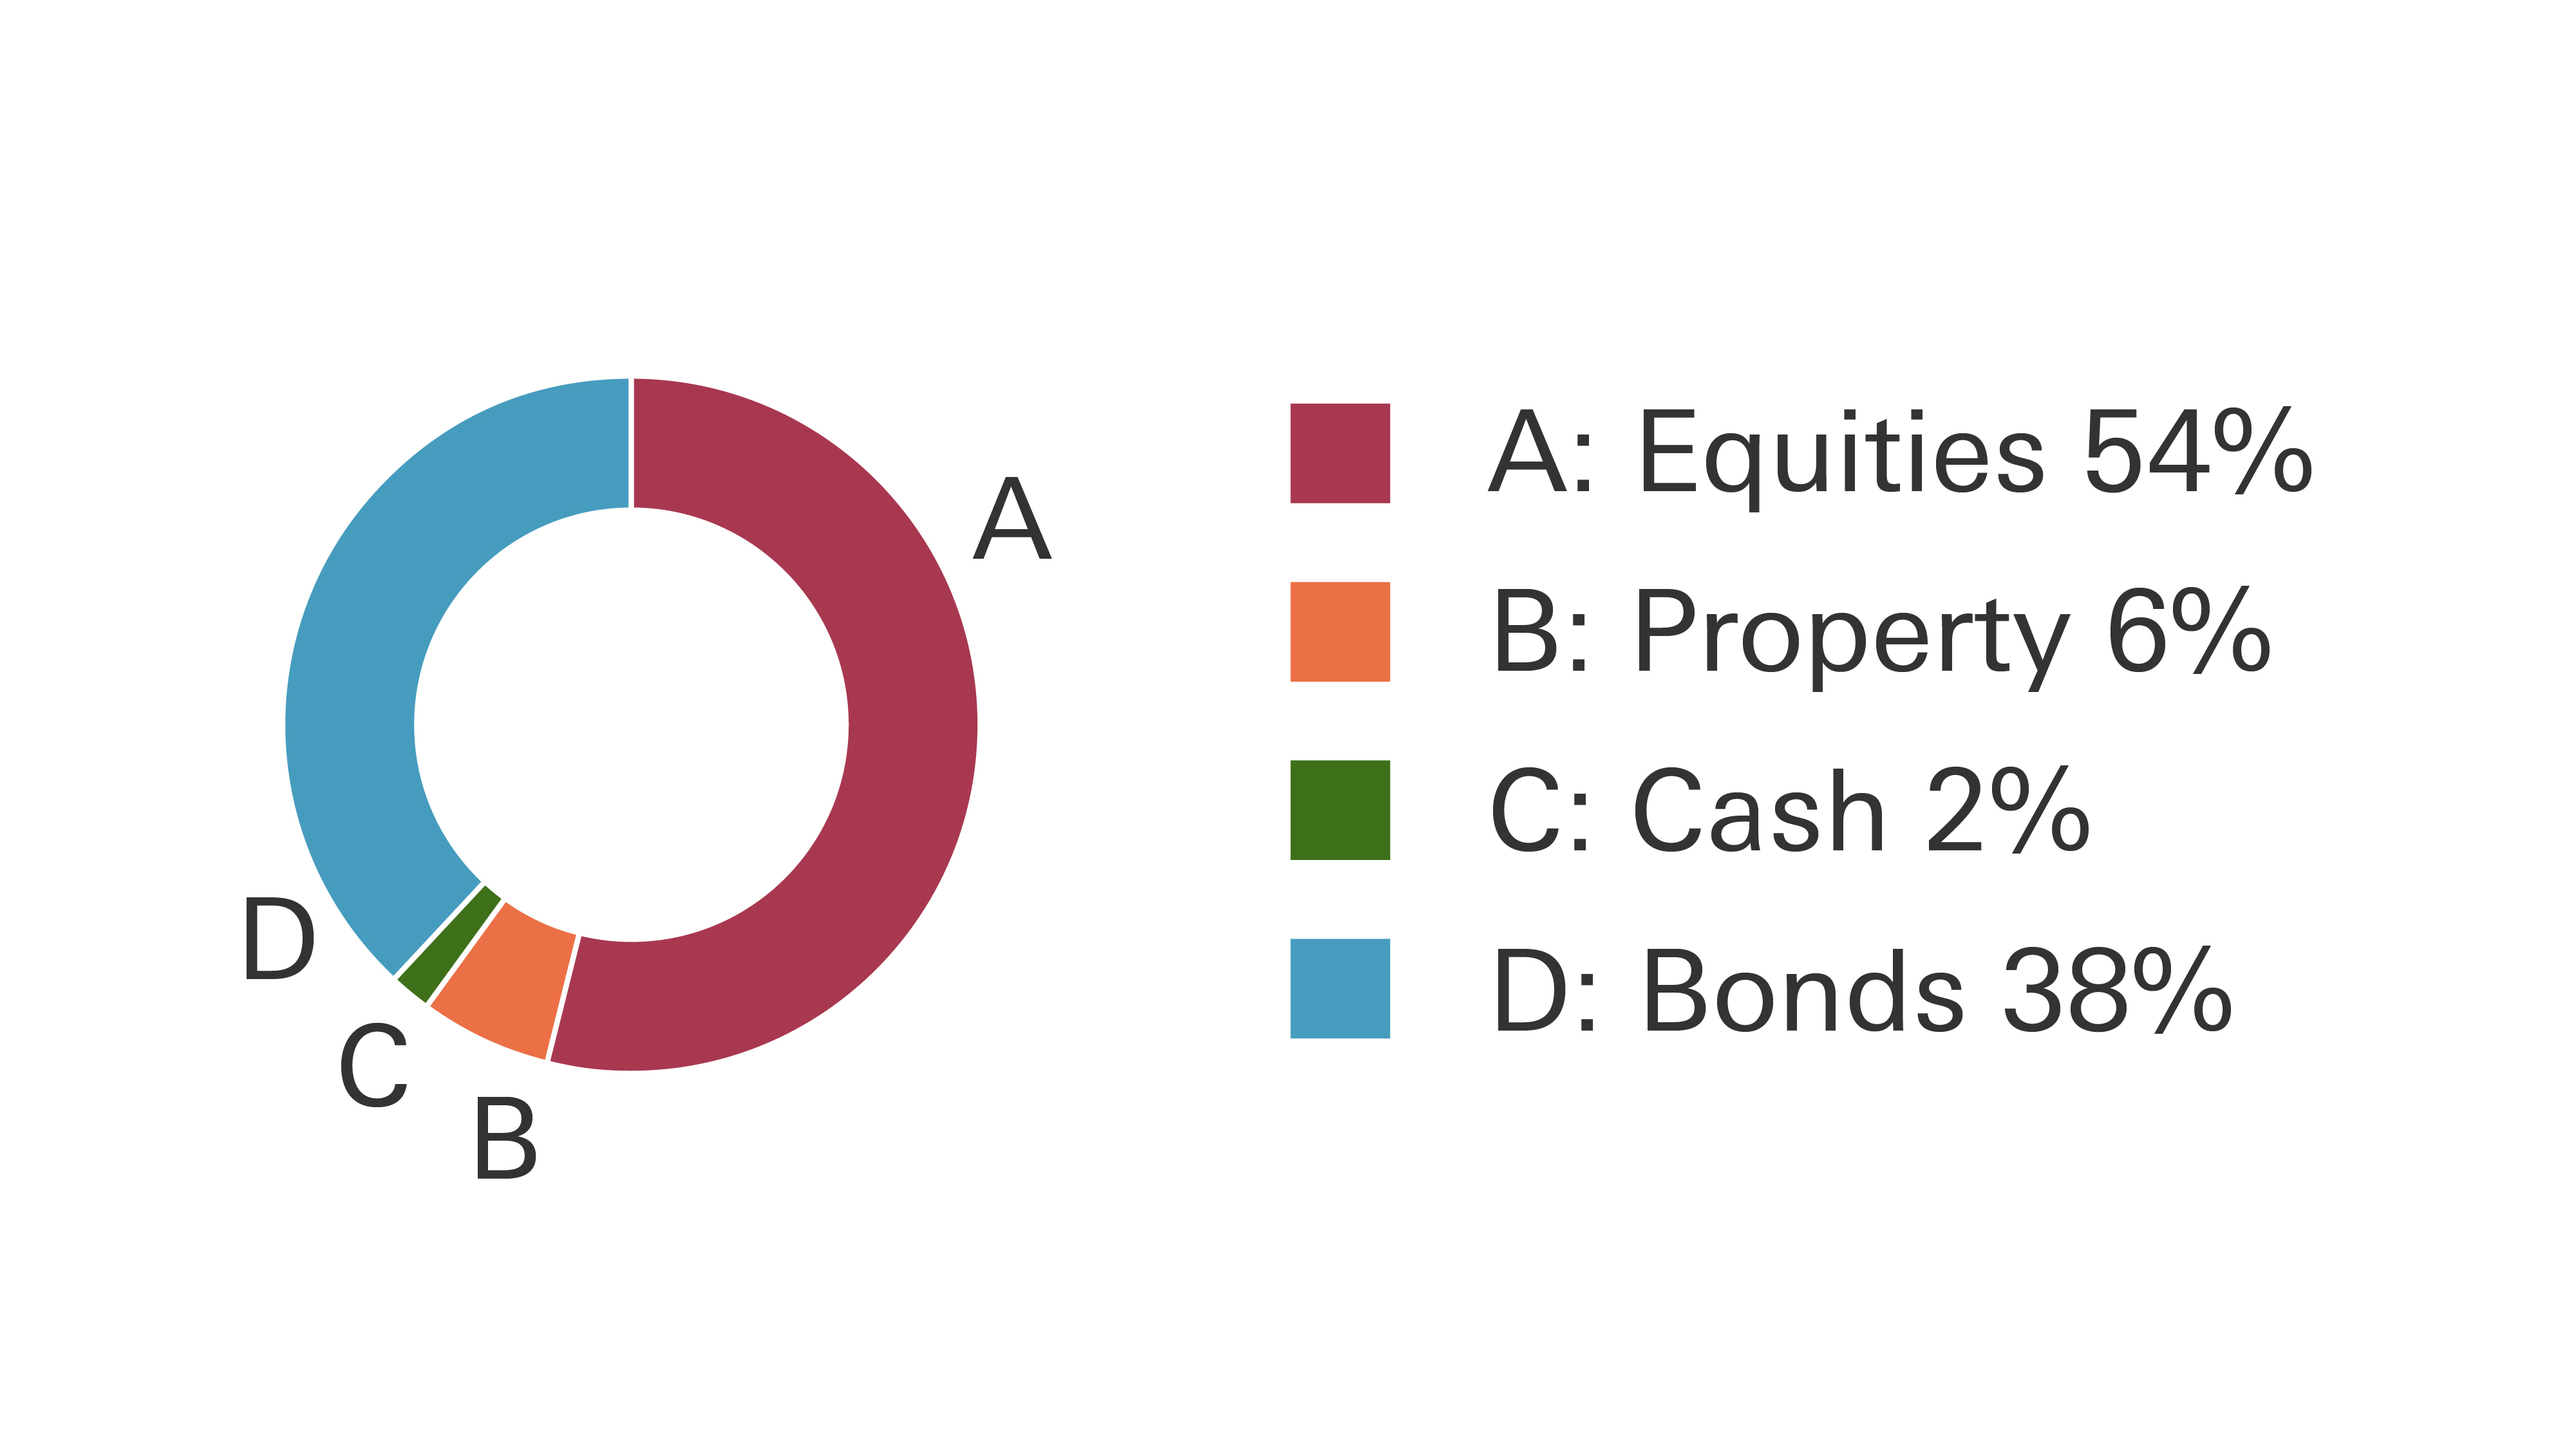 Balanced portfolio pie chart, showing Equities at 54%, Property 6%, Cash 2% and Bonds 38%.